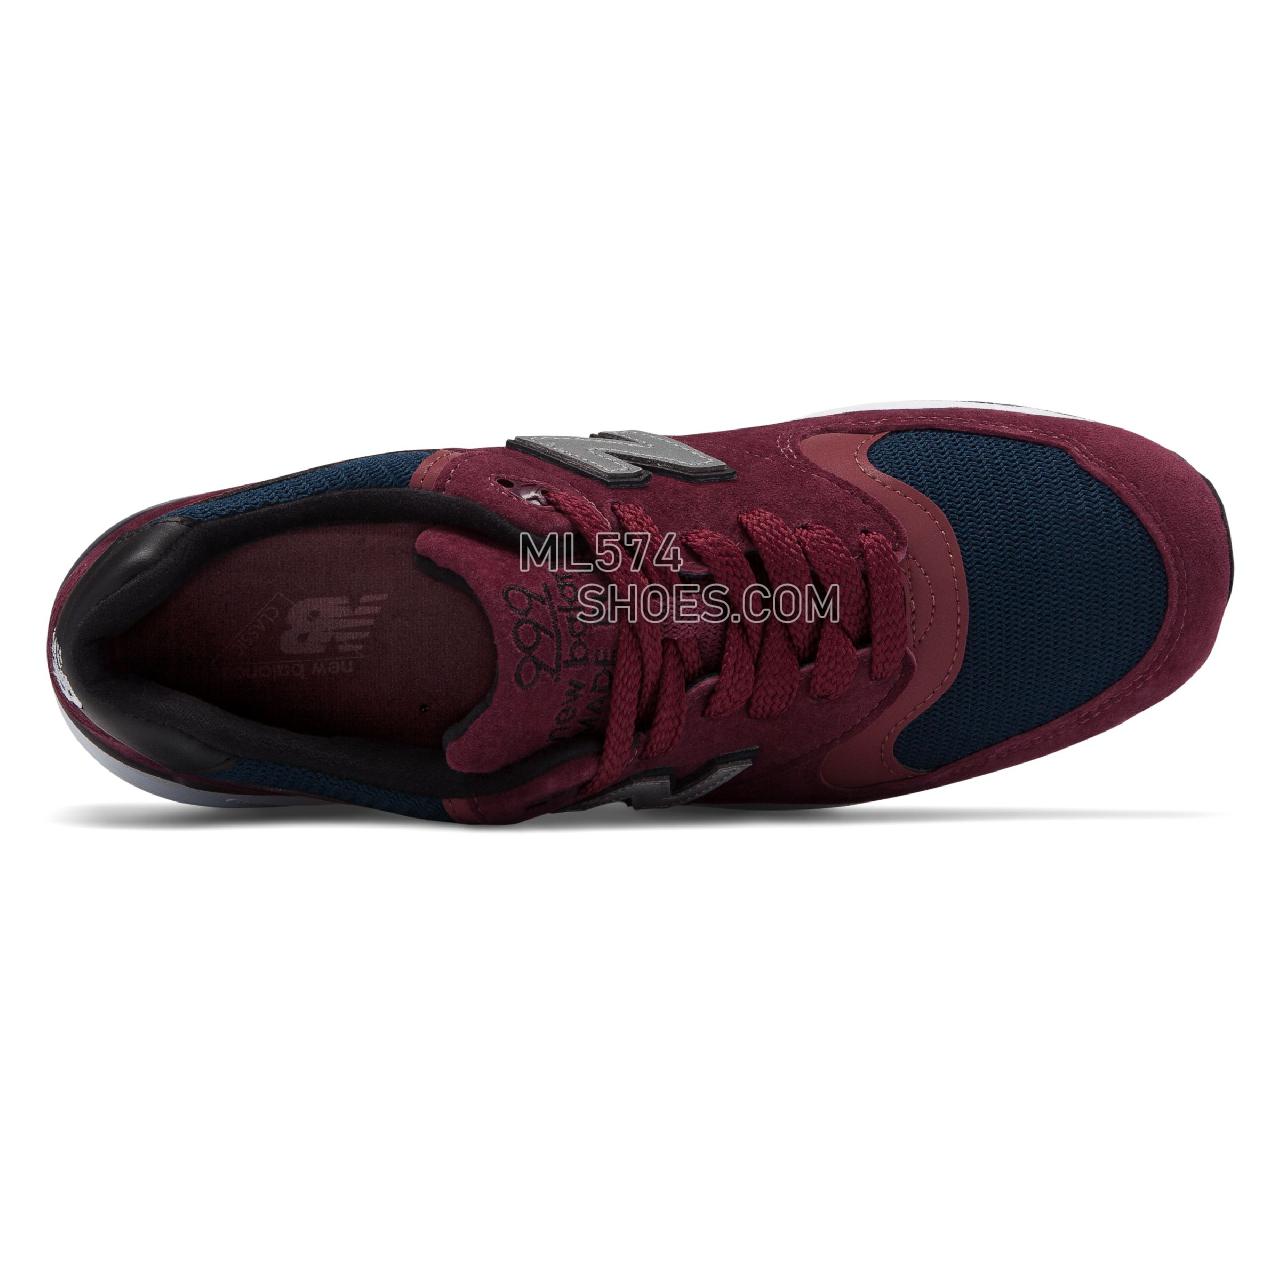 New Balance Made in US 999 - Men's 999 Made in US Classic M999-SEP - Burgundy with Navy - M999JTA